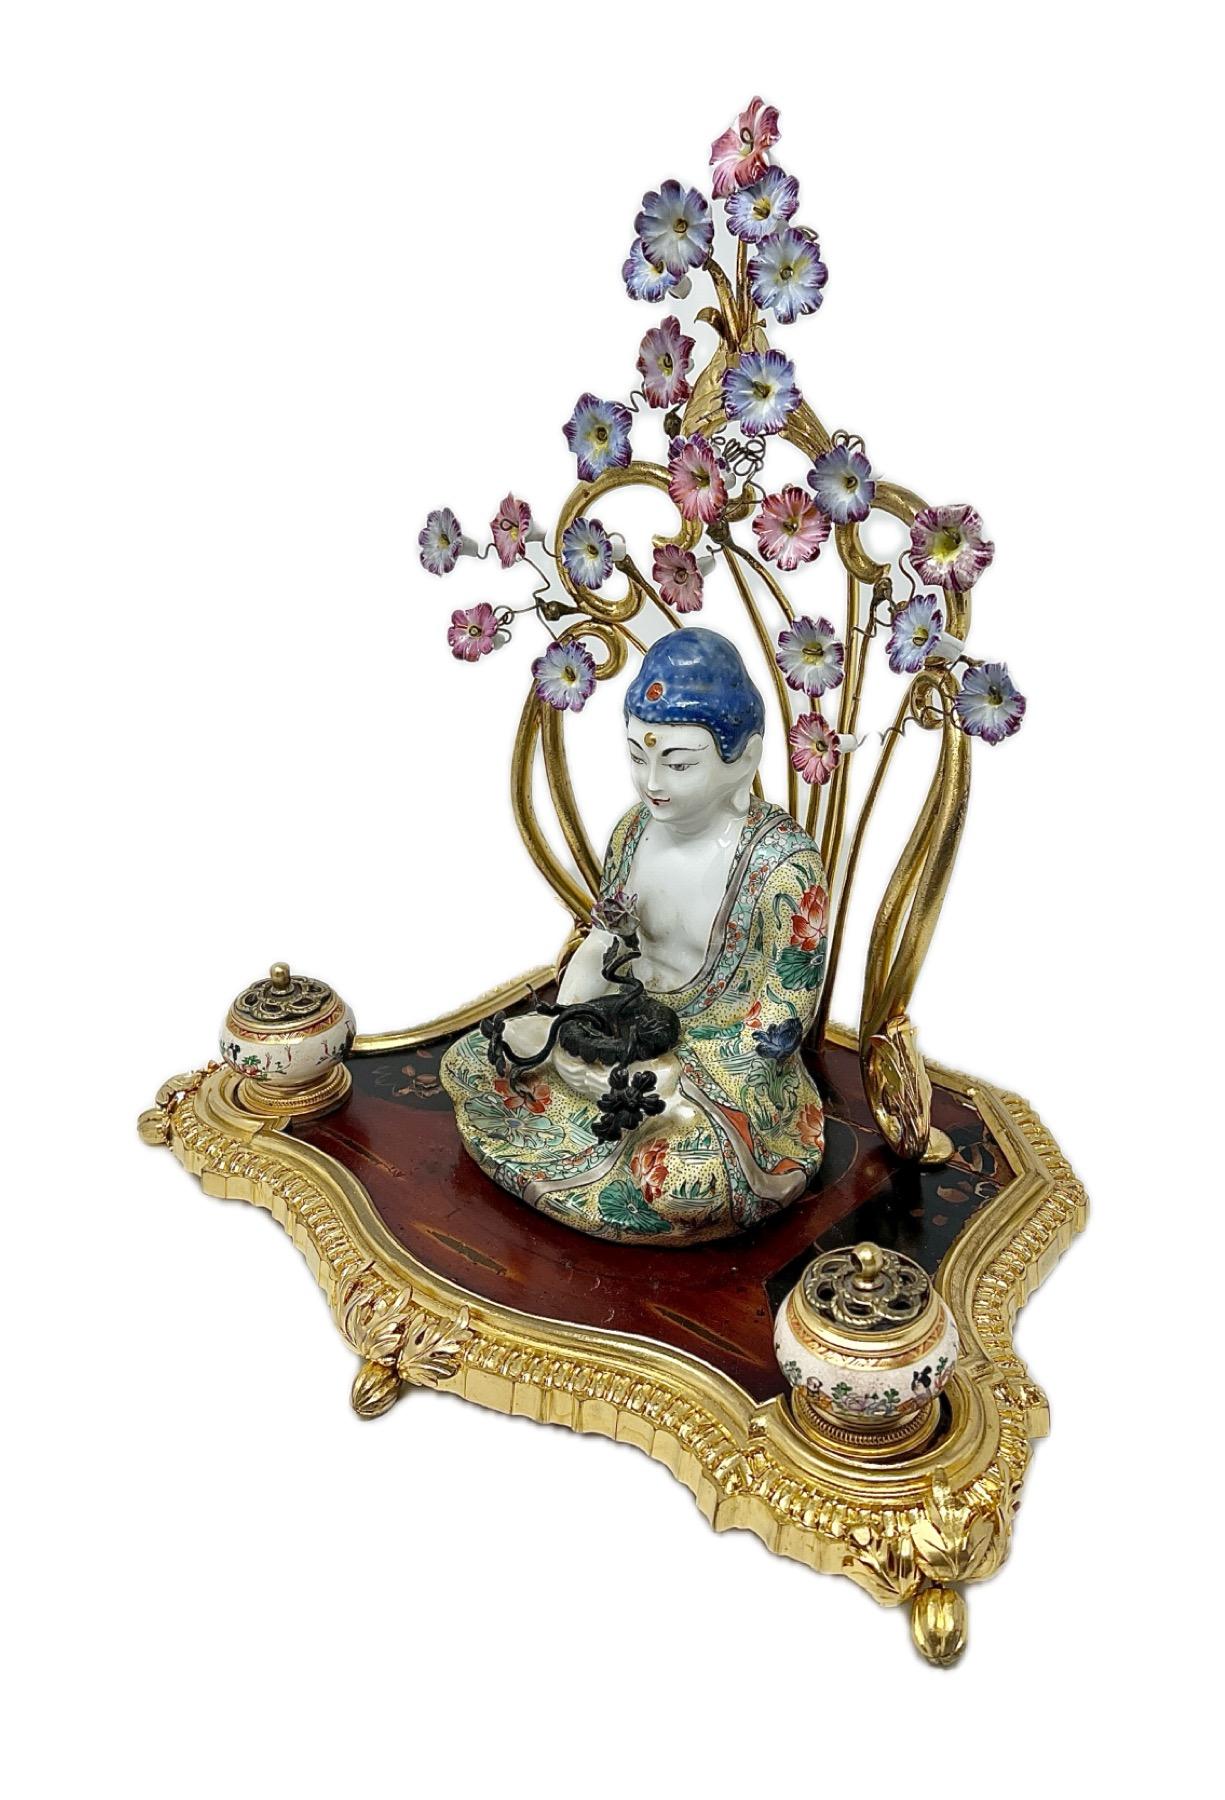 Exquisite Antique French Gold Bronze, Hand-Painted Porcelain & Lacquer Inkwell, Circa 1870-1880.